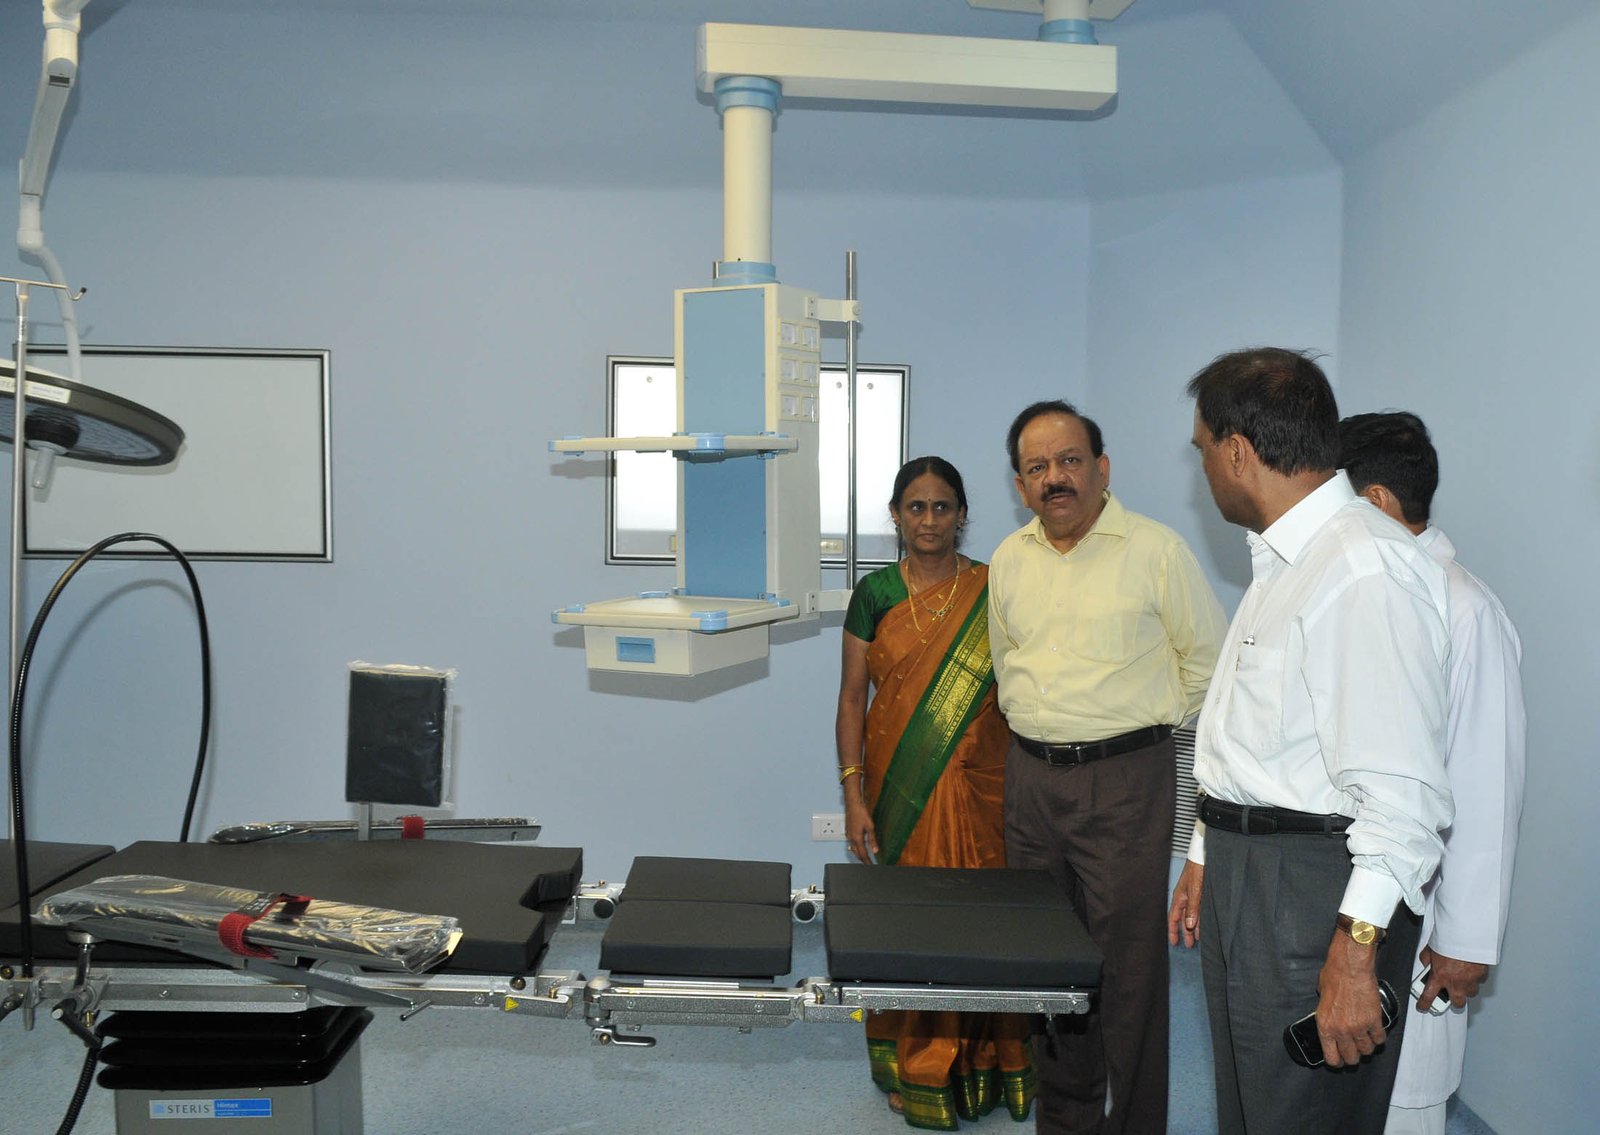 The Union minister for health and family welfare, Dr Harsh Vardhan visiting the National Organ and Tissue Transplant Organization (NOTTO), at the Safdarjung hospital, in New Delhi 